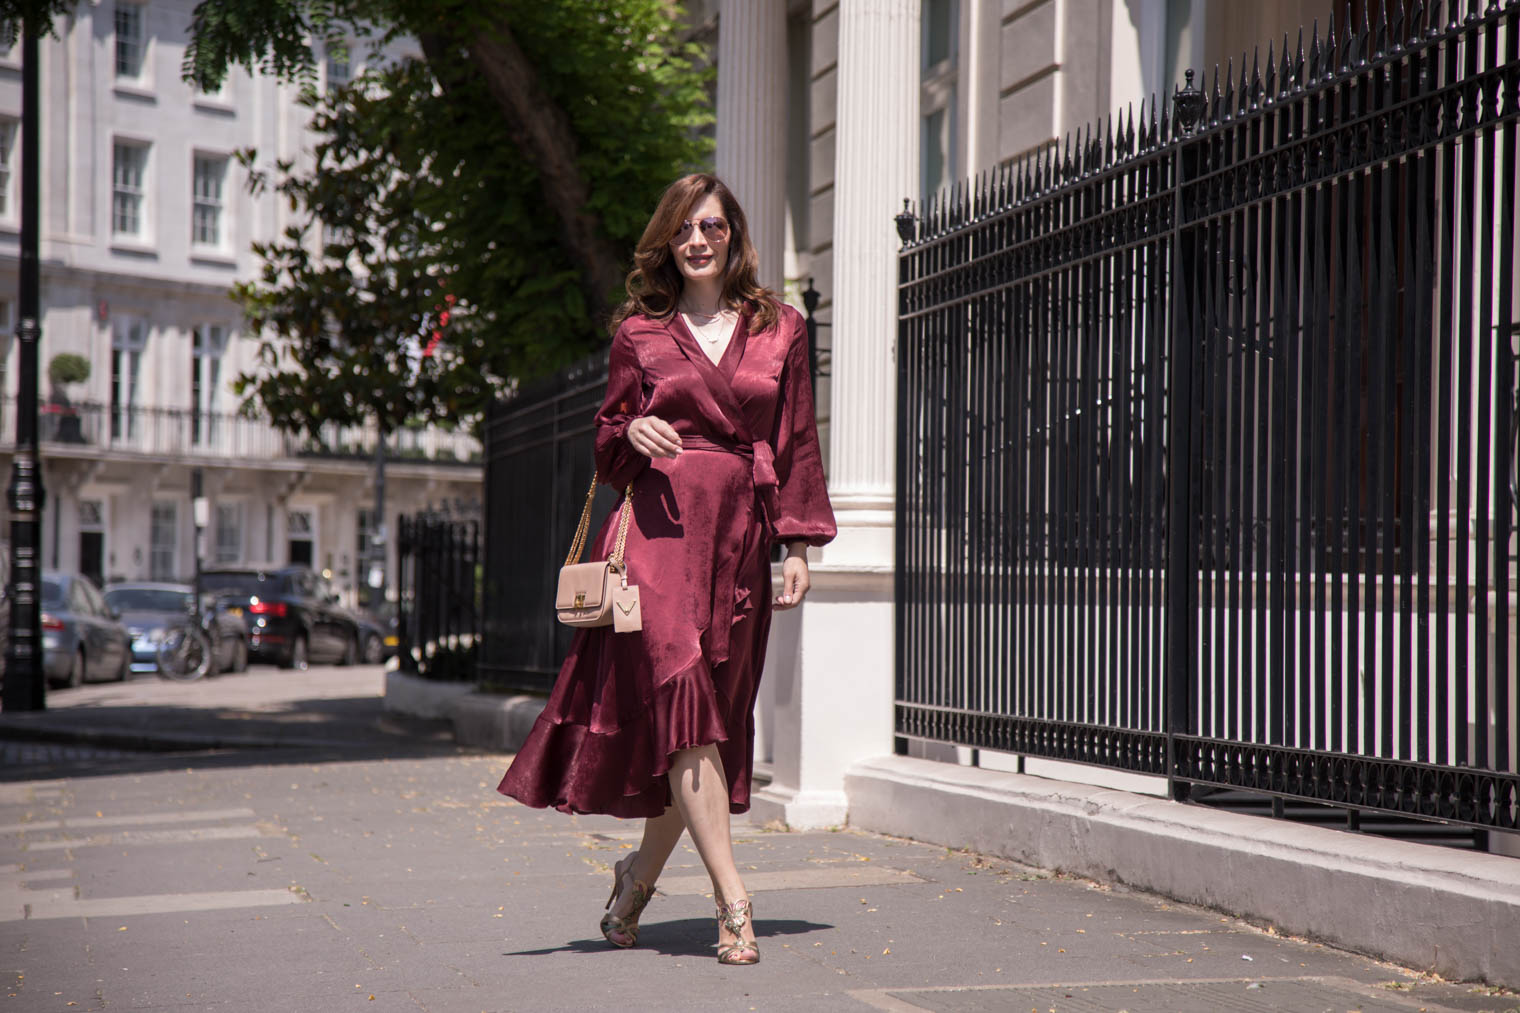 Petra from Chic Journal wearing burgundy wrap dress